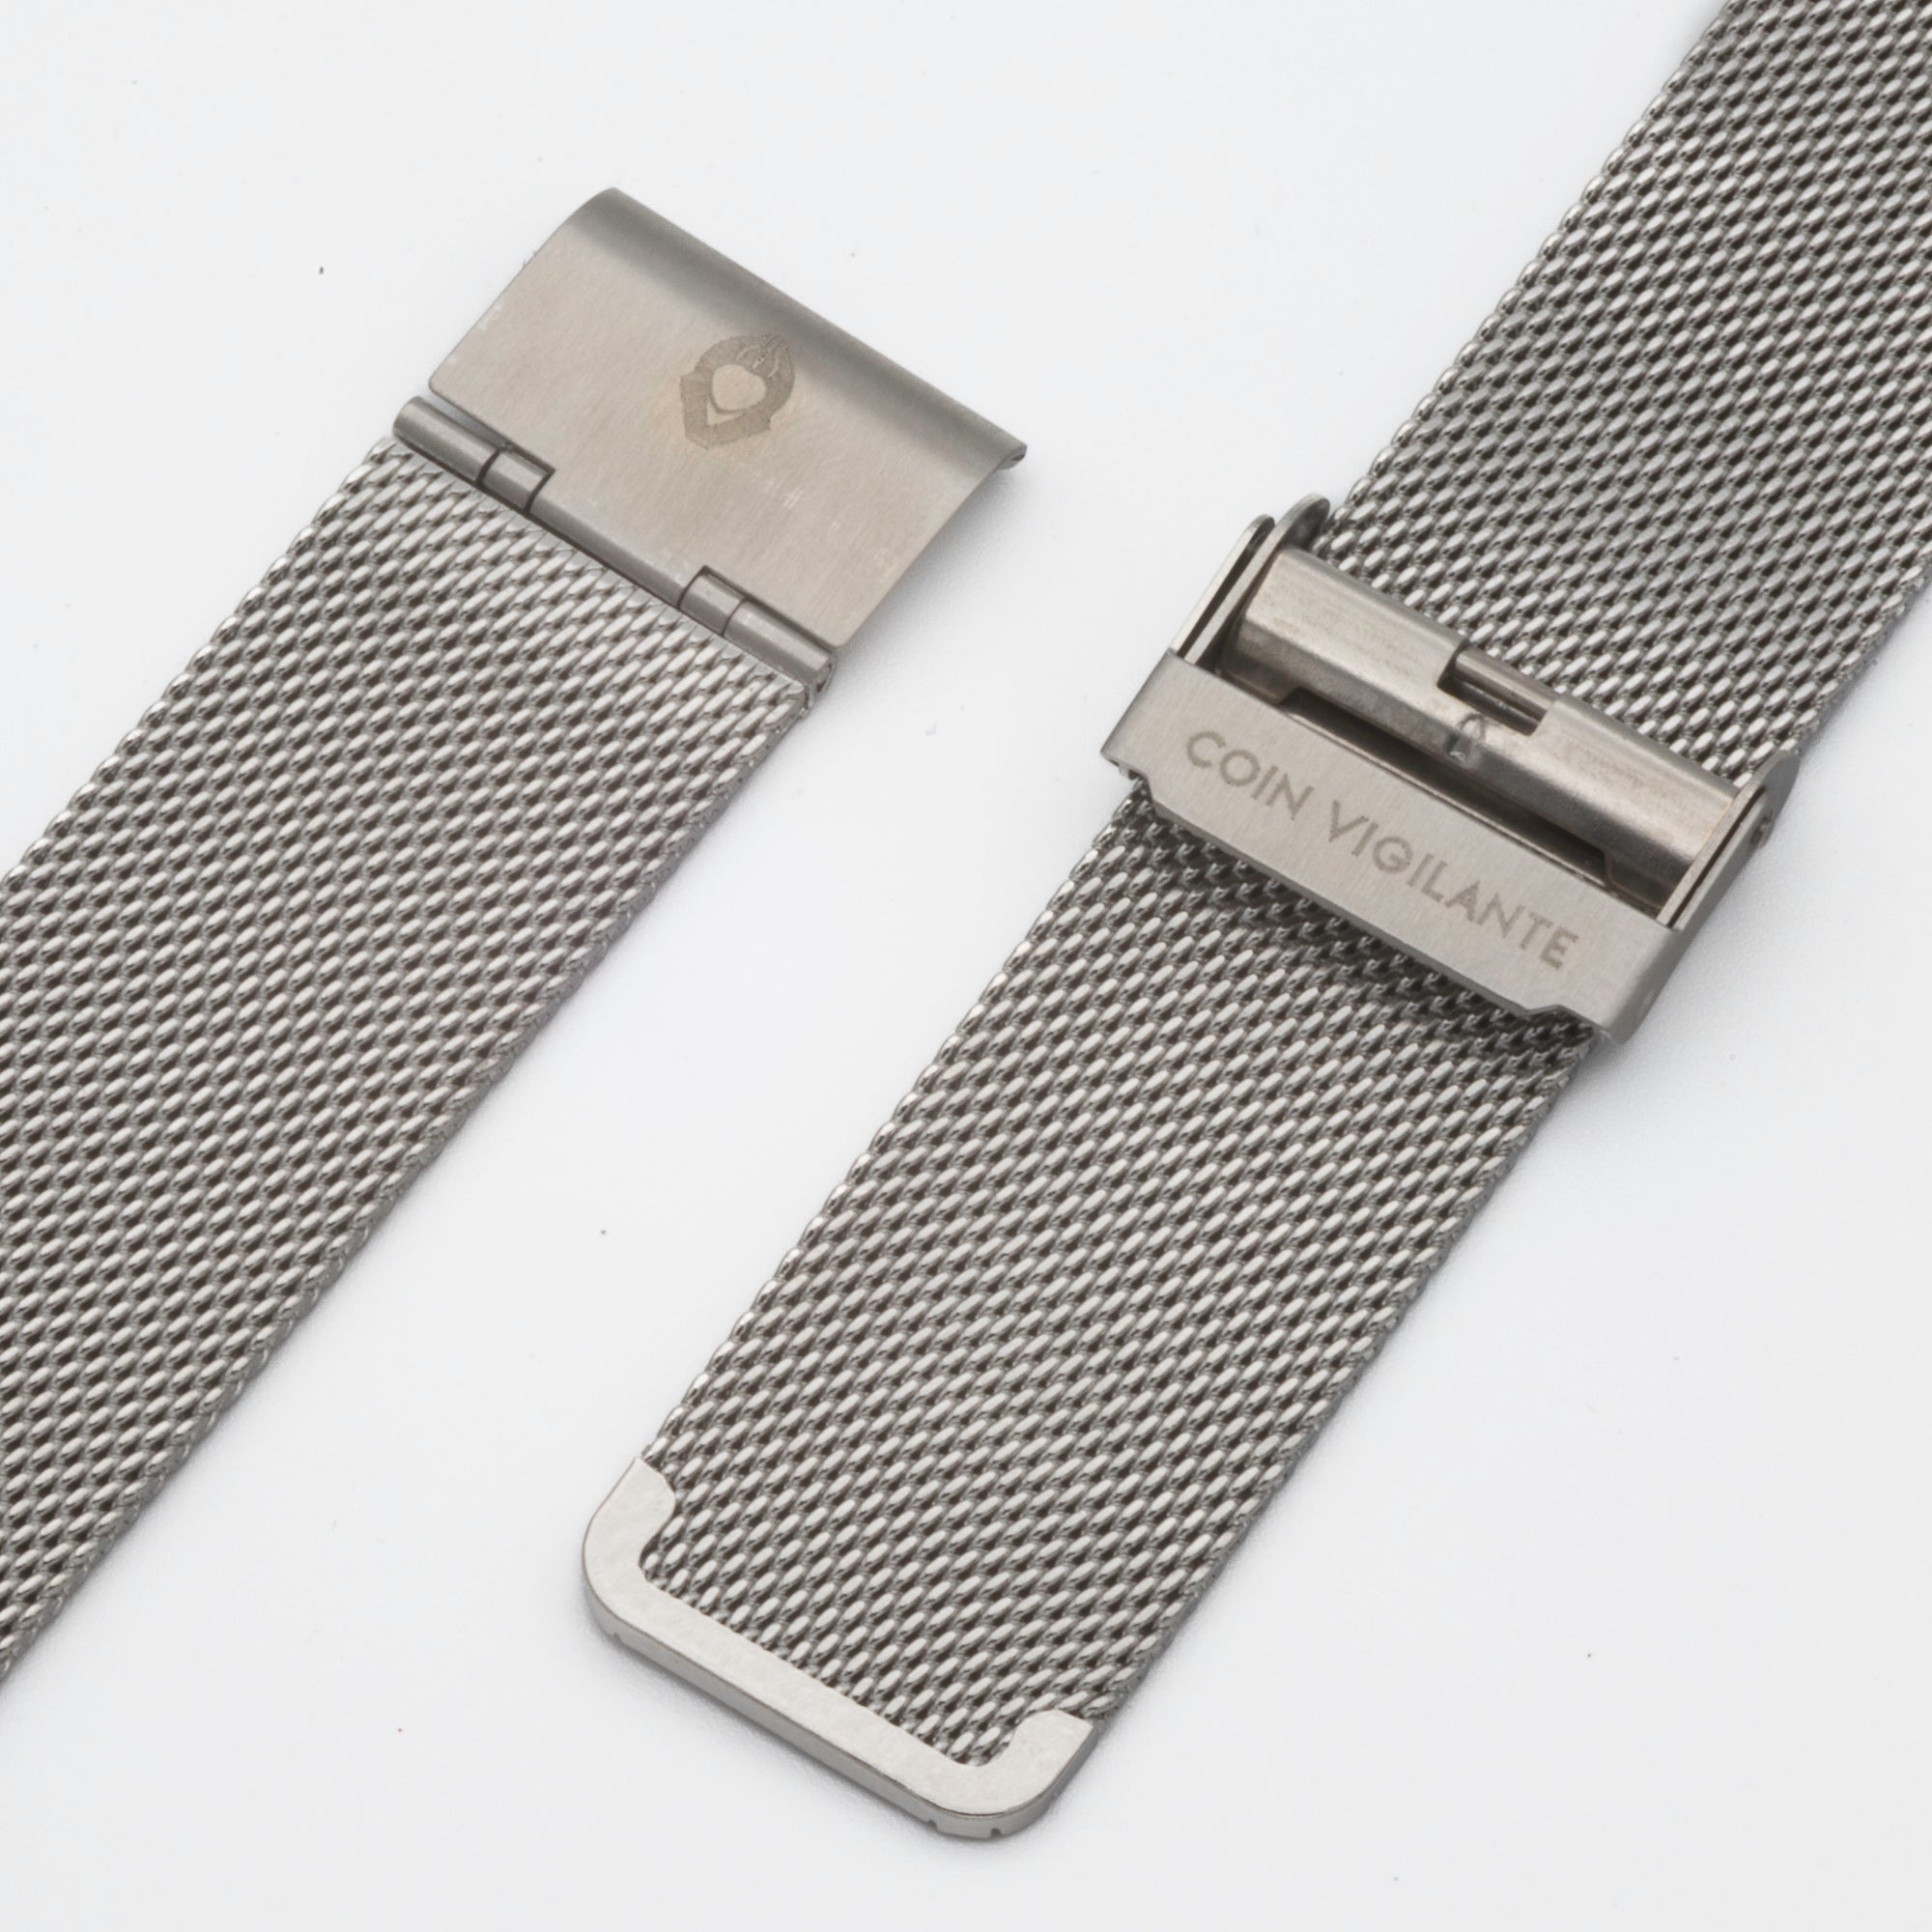 Detailed view of the silver finish on the Coin Vigilante Stainless Steel Mesh Band